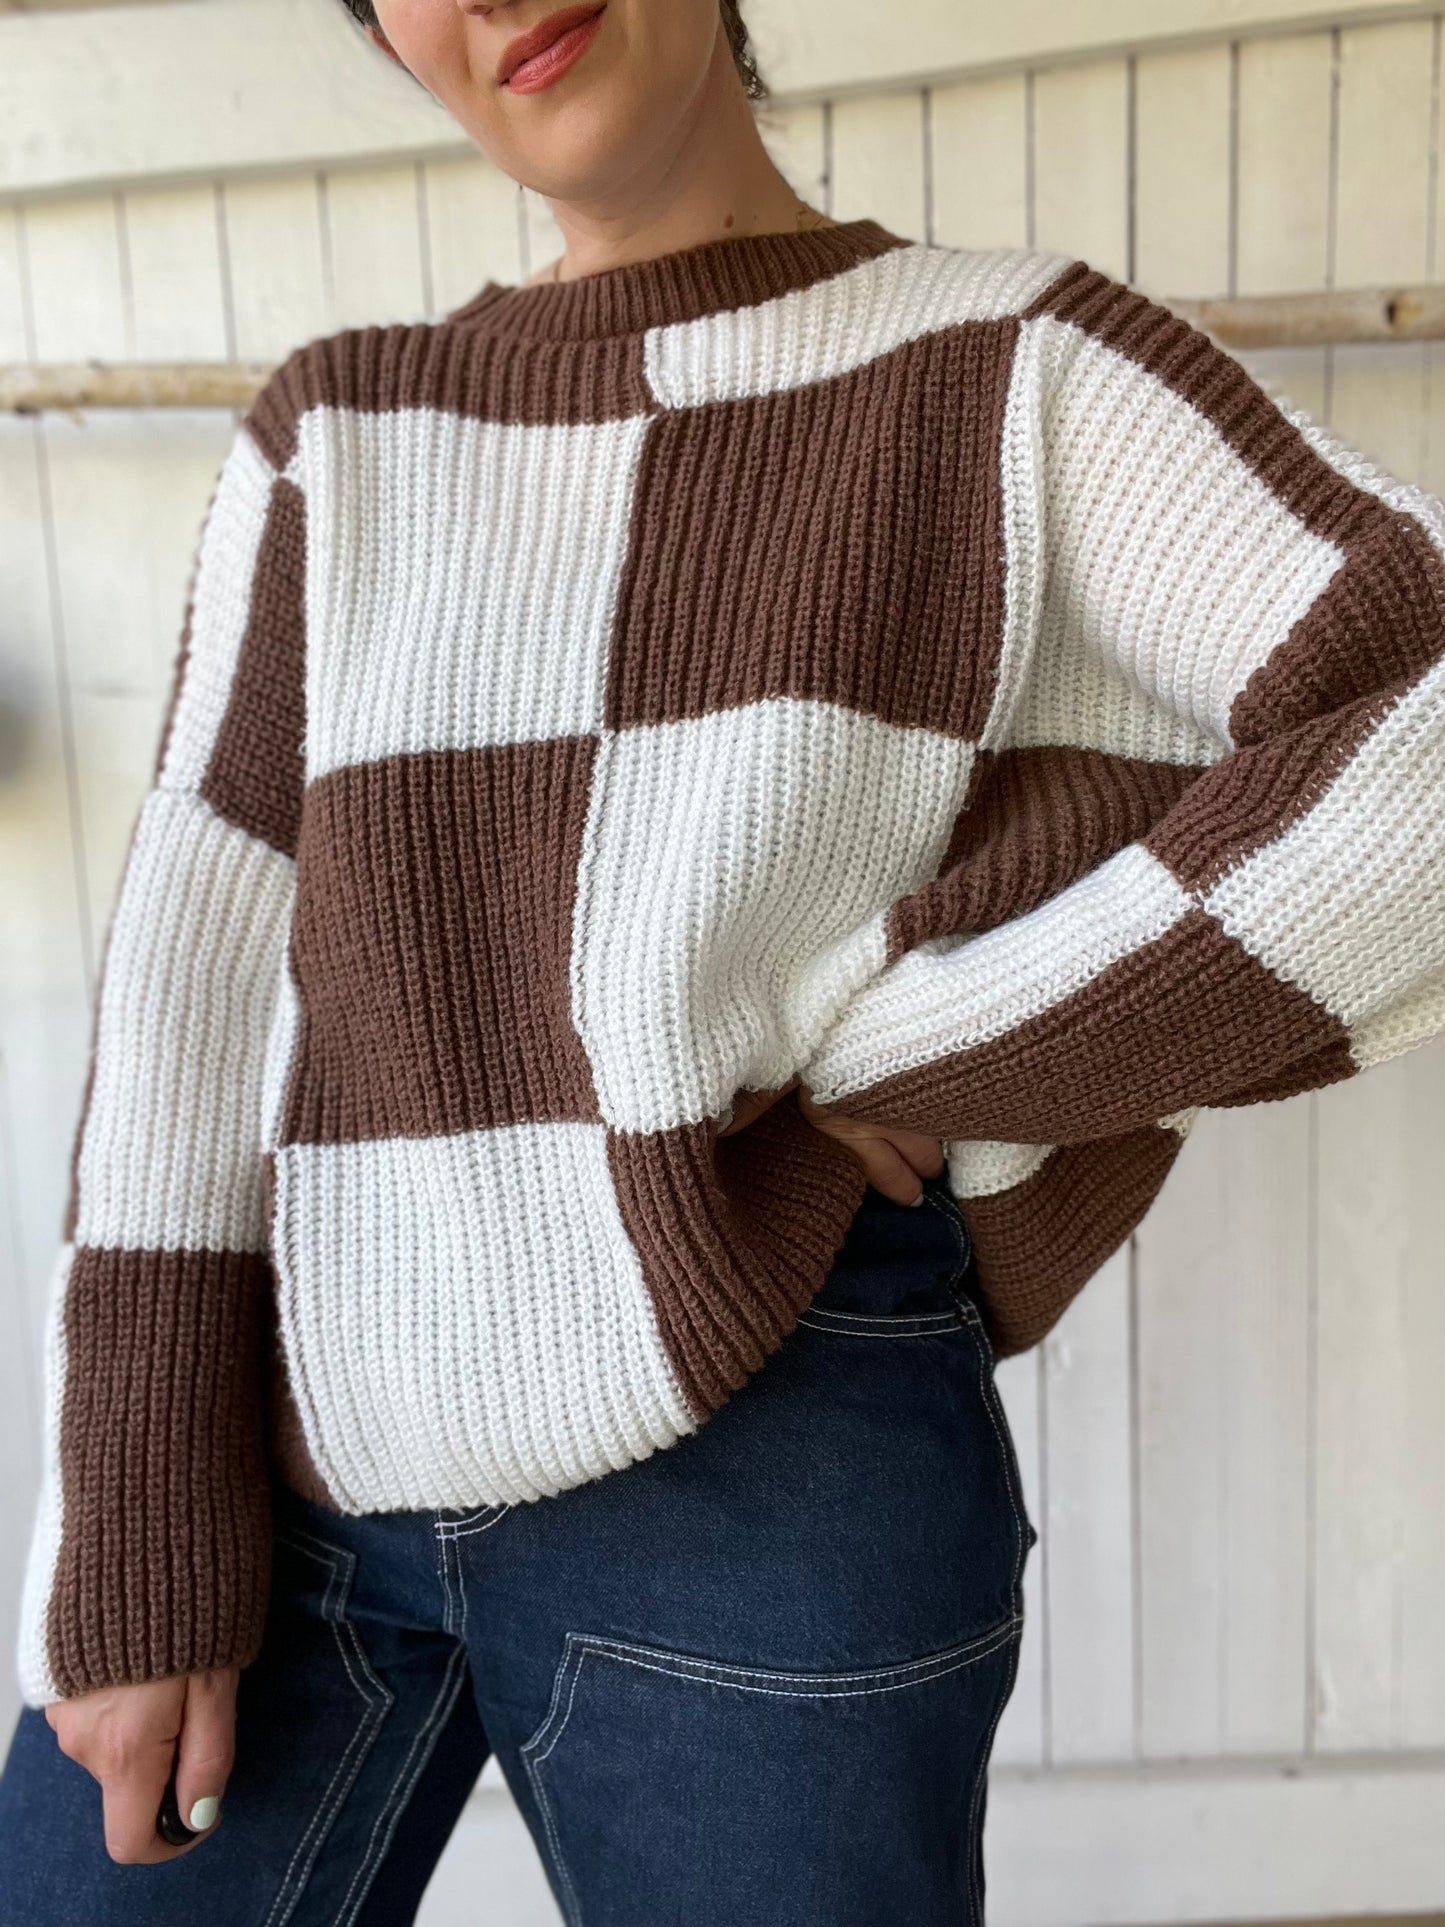 Oversize Block Brown & White Sweater - Size L